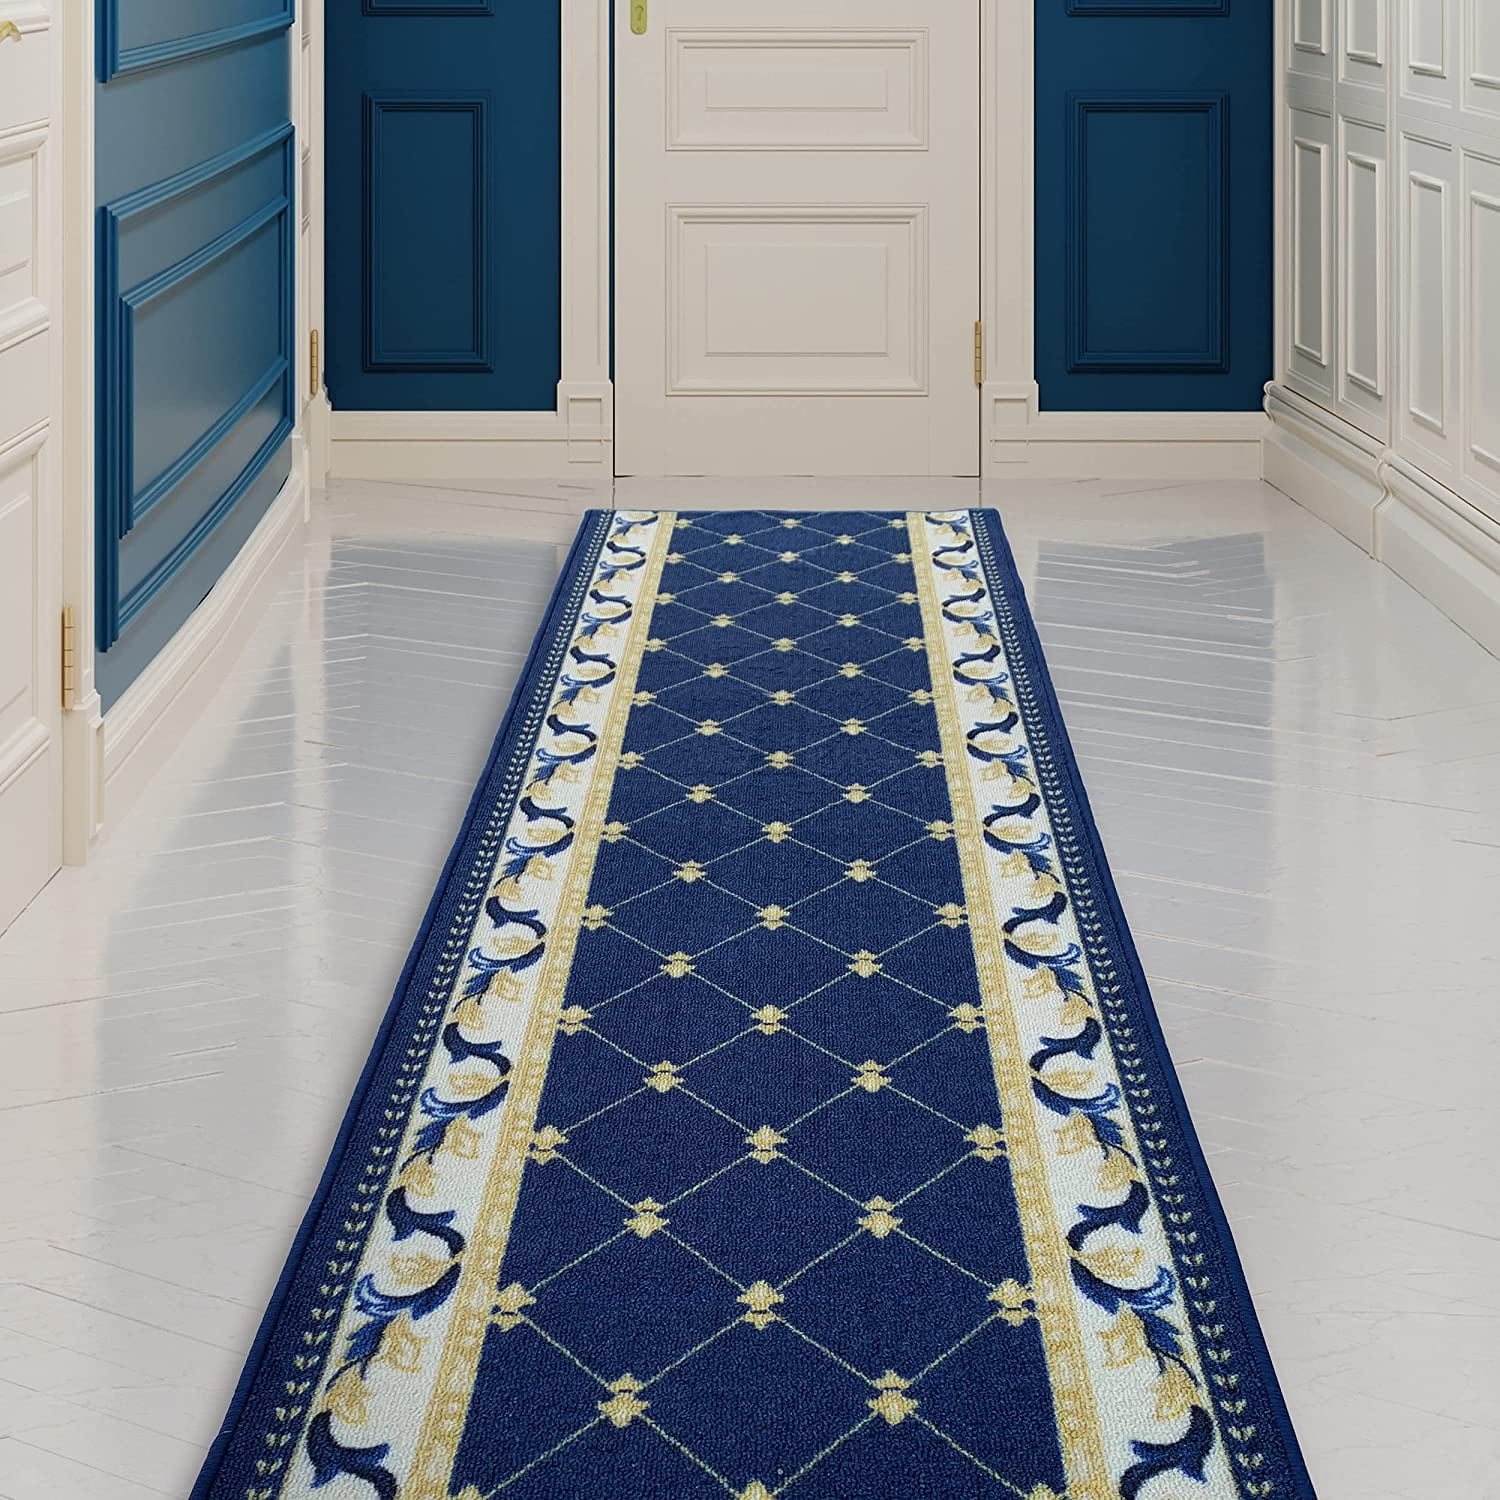 Details about   New Long-lasting Matting Anti Slip Long Navy Blue Entrance Runner Price Per Foot 